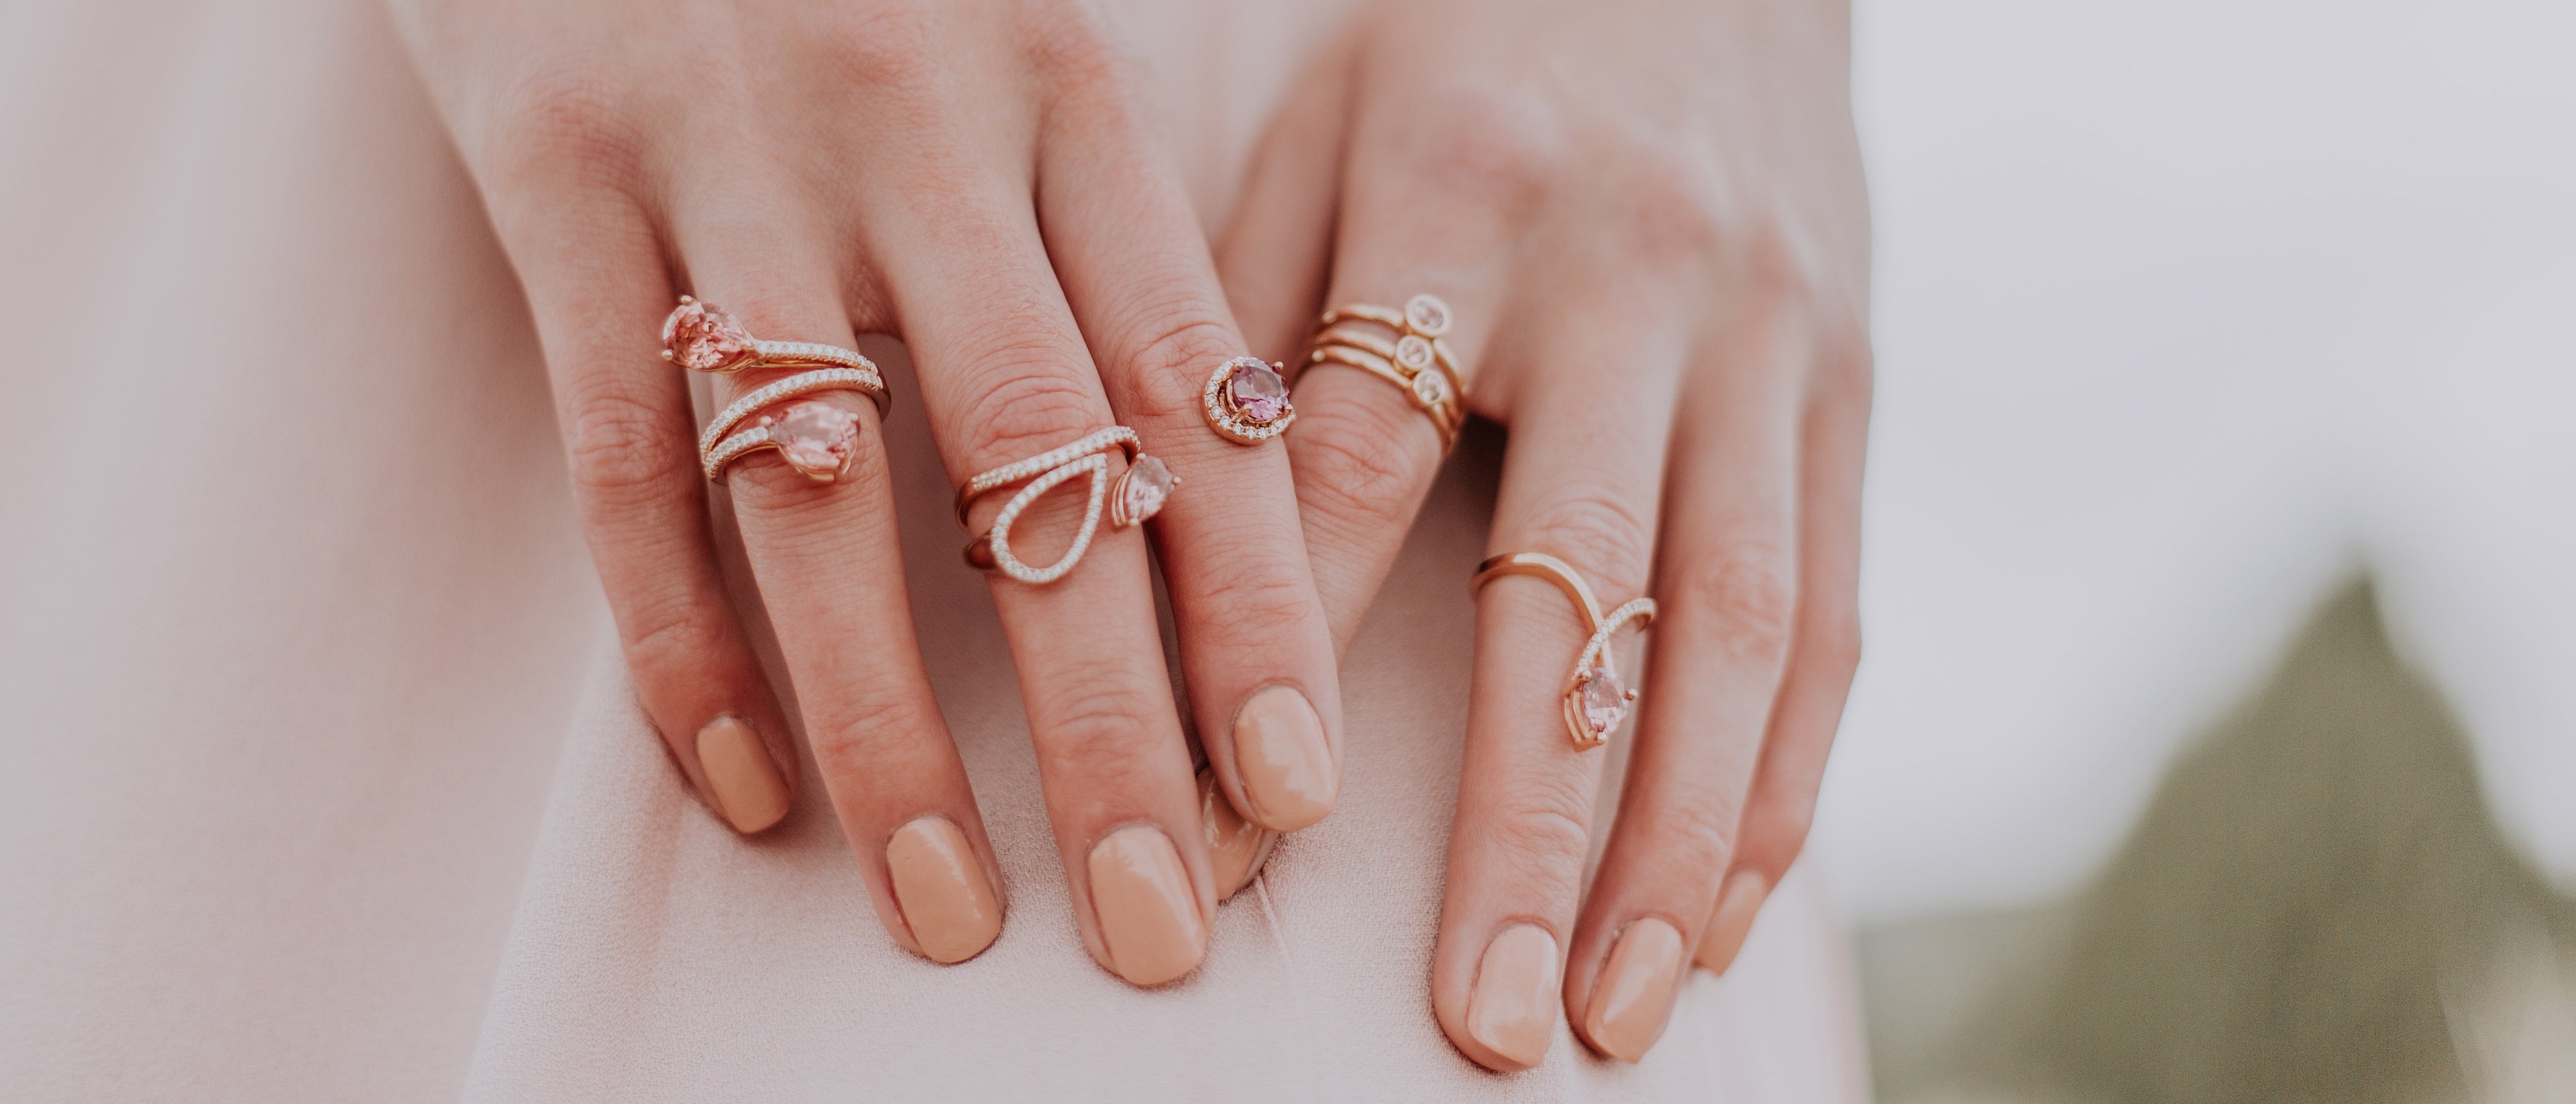 A pair of hands wearing assorted fashion rings with various gems